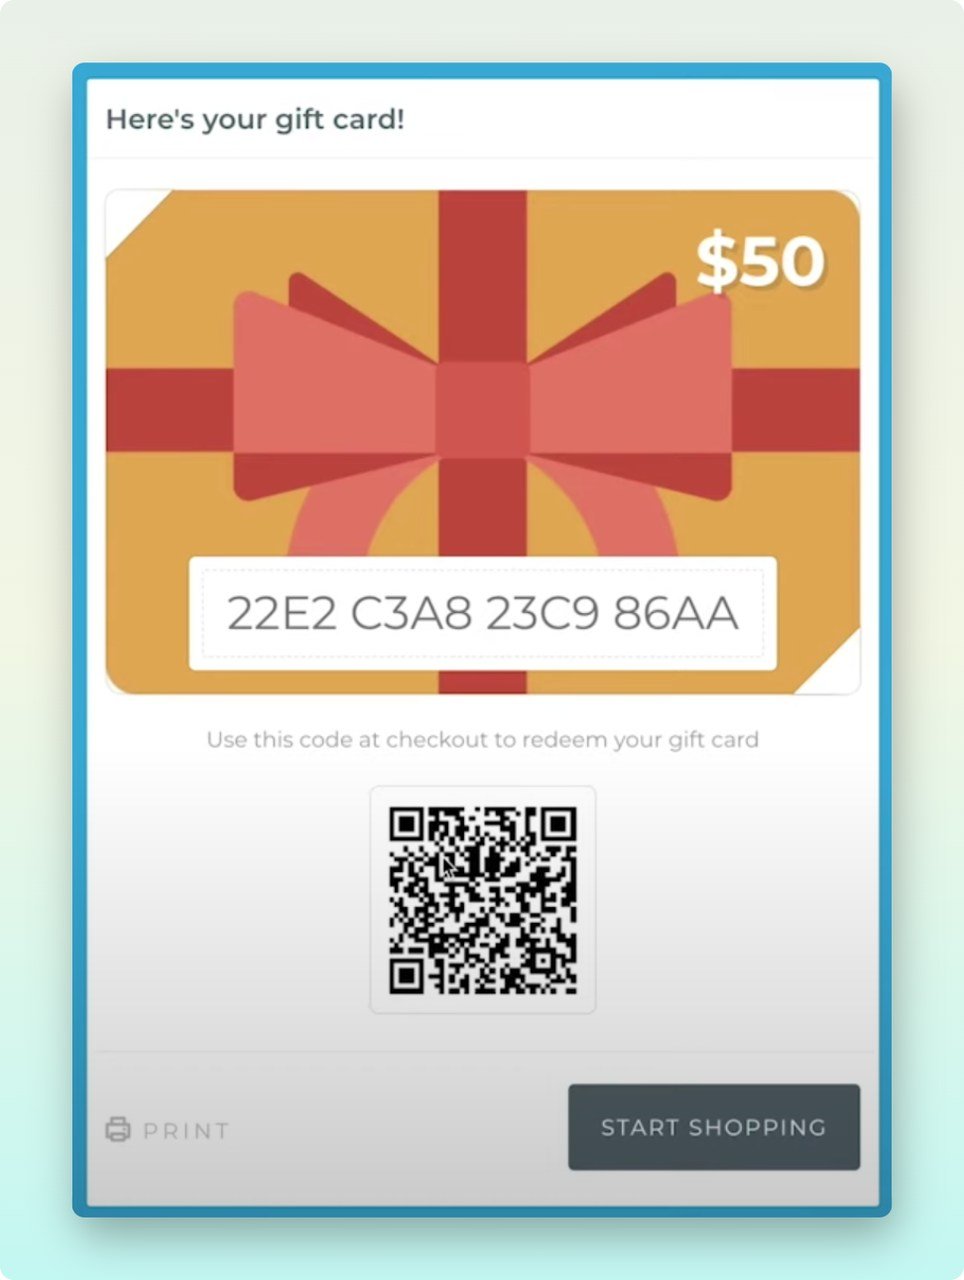 How To Create Gift Cards for Your Business 2023